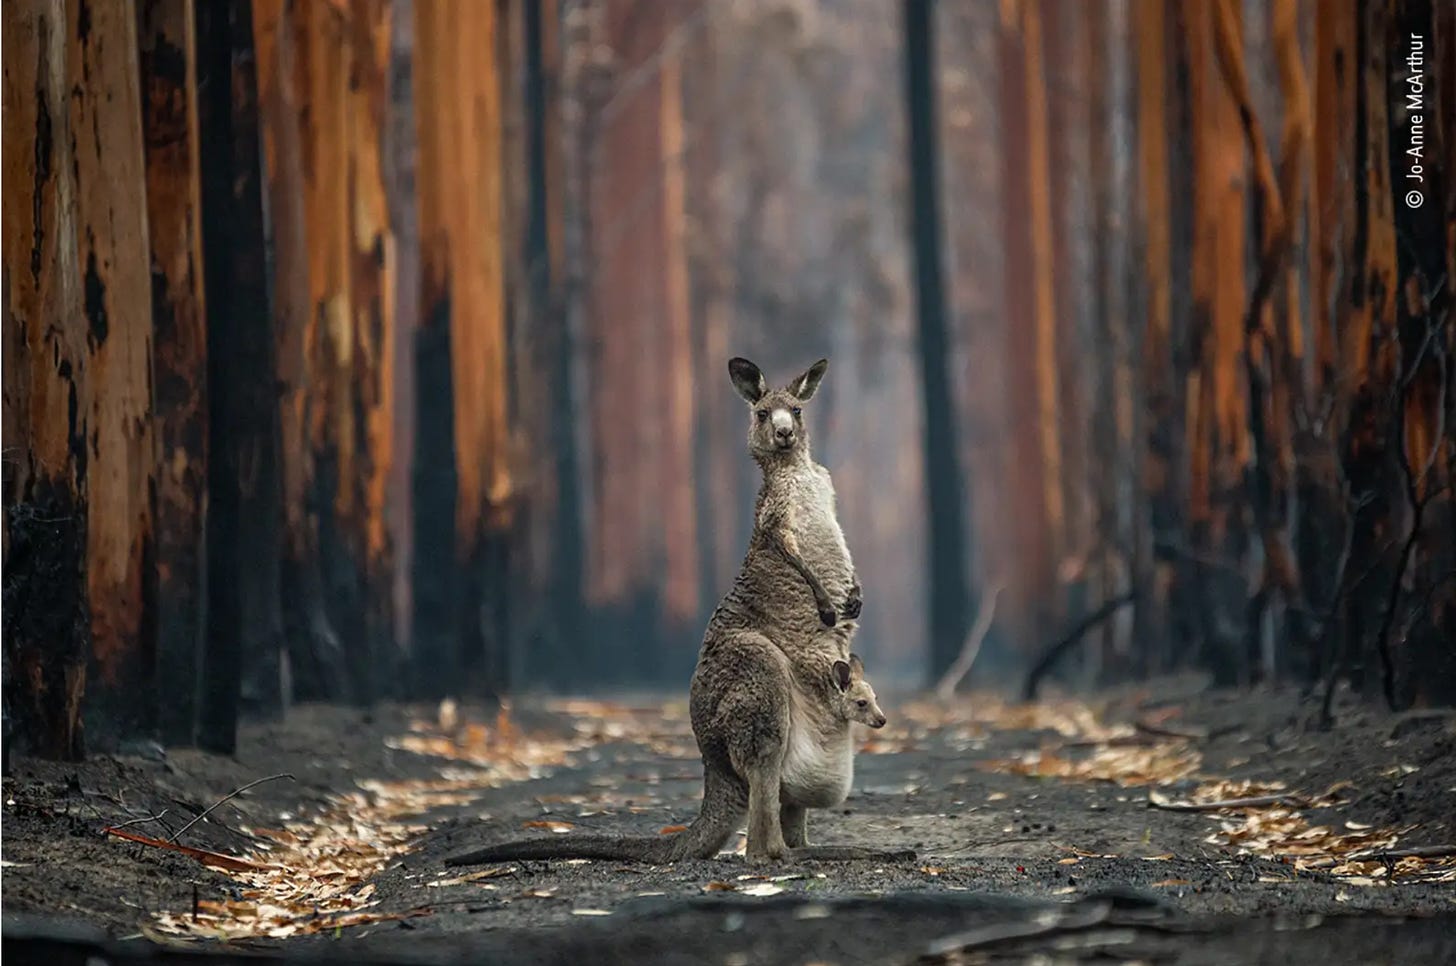 A photo of a grey kangaroo with joey standing in a pathway amidst burned trees, looking at the camera